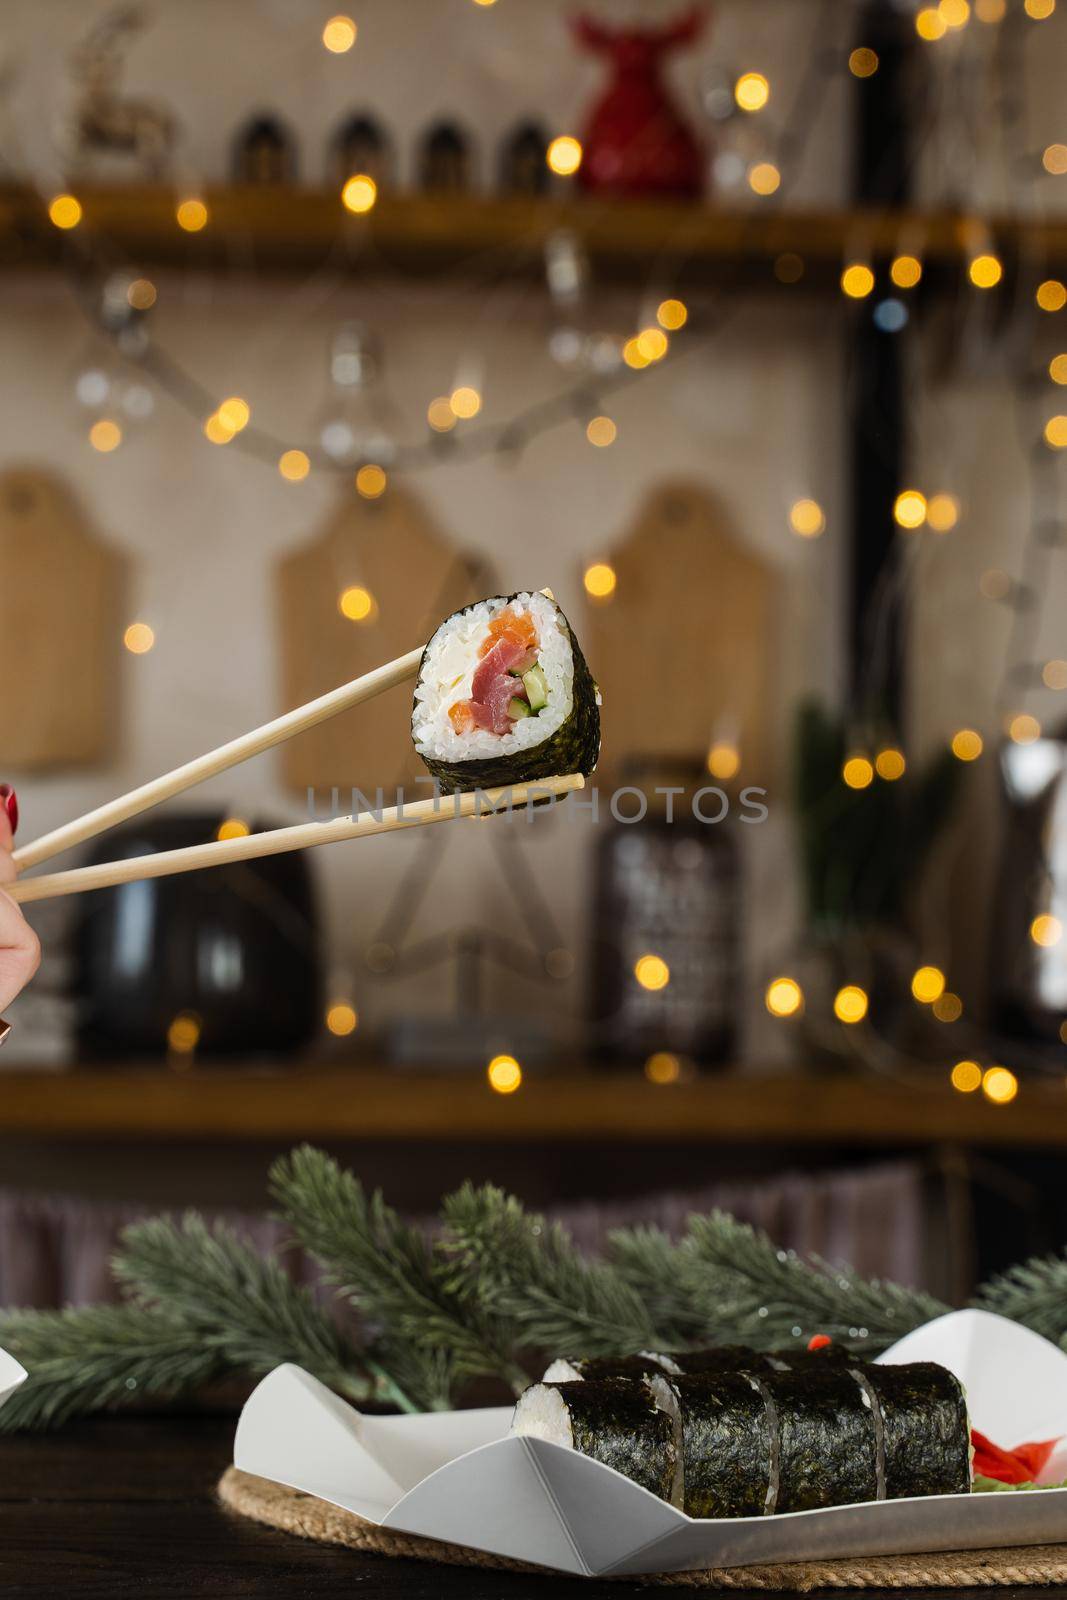 Holding sushi roll on the new year lights background. Christmas decoration. Food delivery at new year eve. Roll with salmon, tuna, cucumber and soft cheese